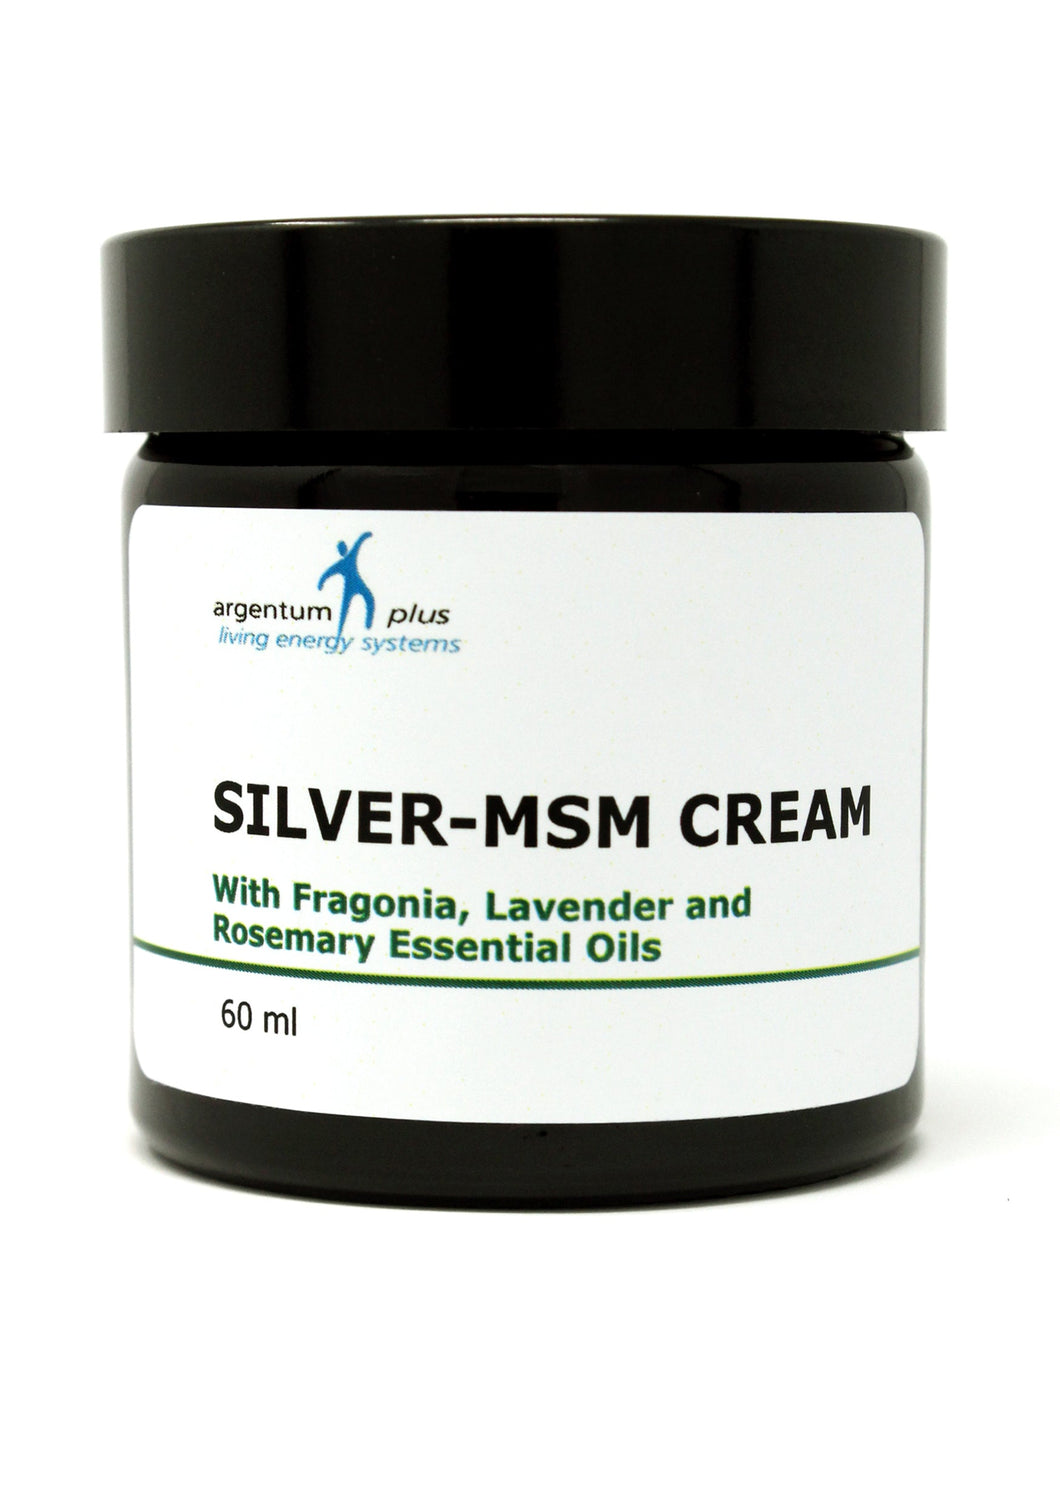 Silver-MSM Cream with Fragonia, Lavender and Rosemary 3 x 60ml - Special Offer Price!!!